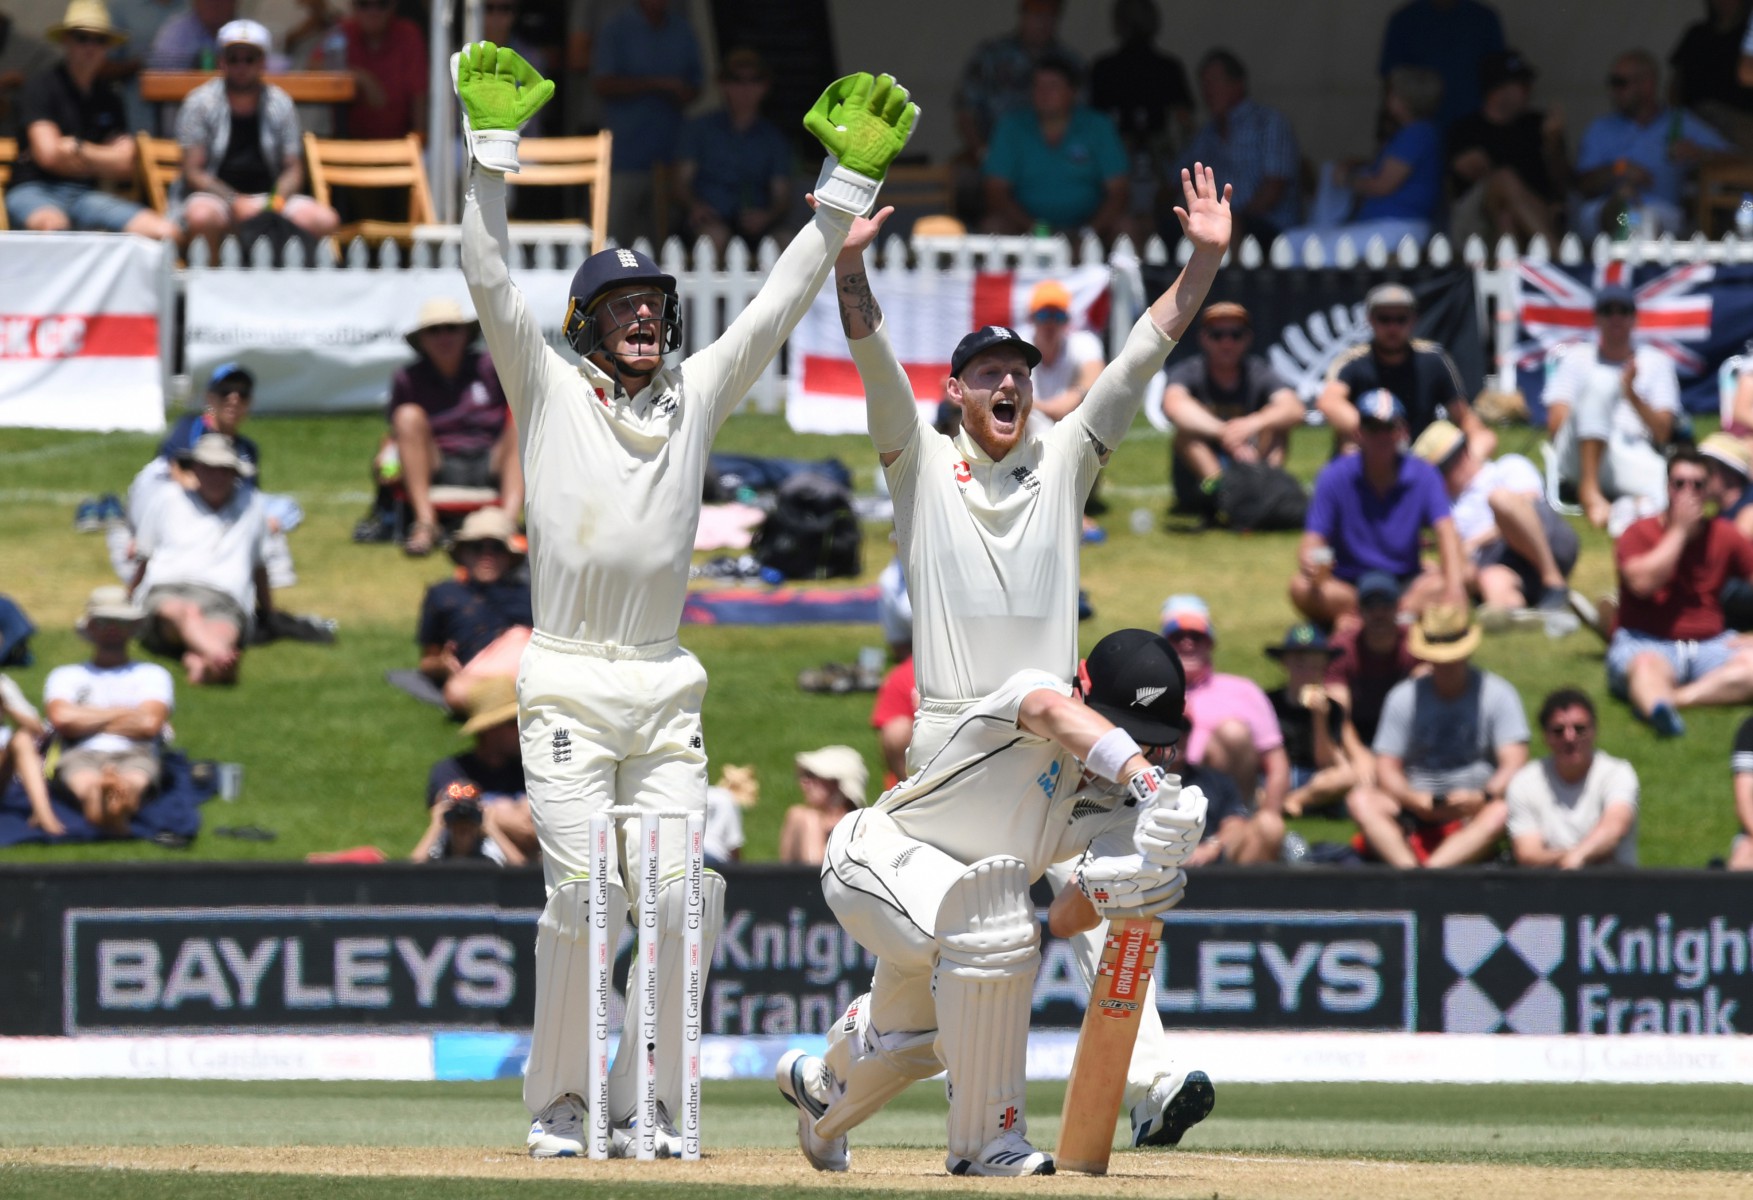 , England frustrated as New Zealand lead by 41 runs with battling BJ Watlings unbeaten ton adding to misery